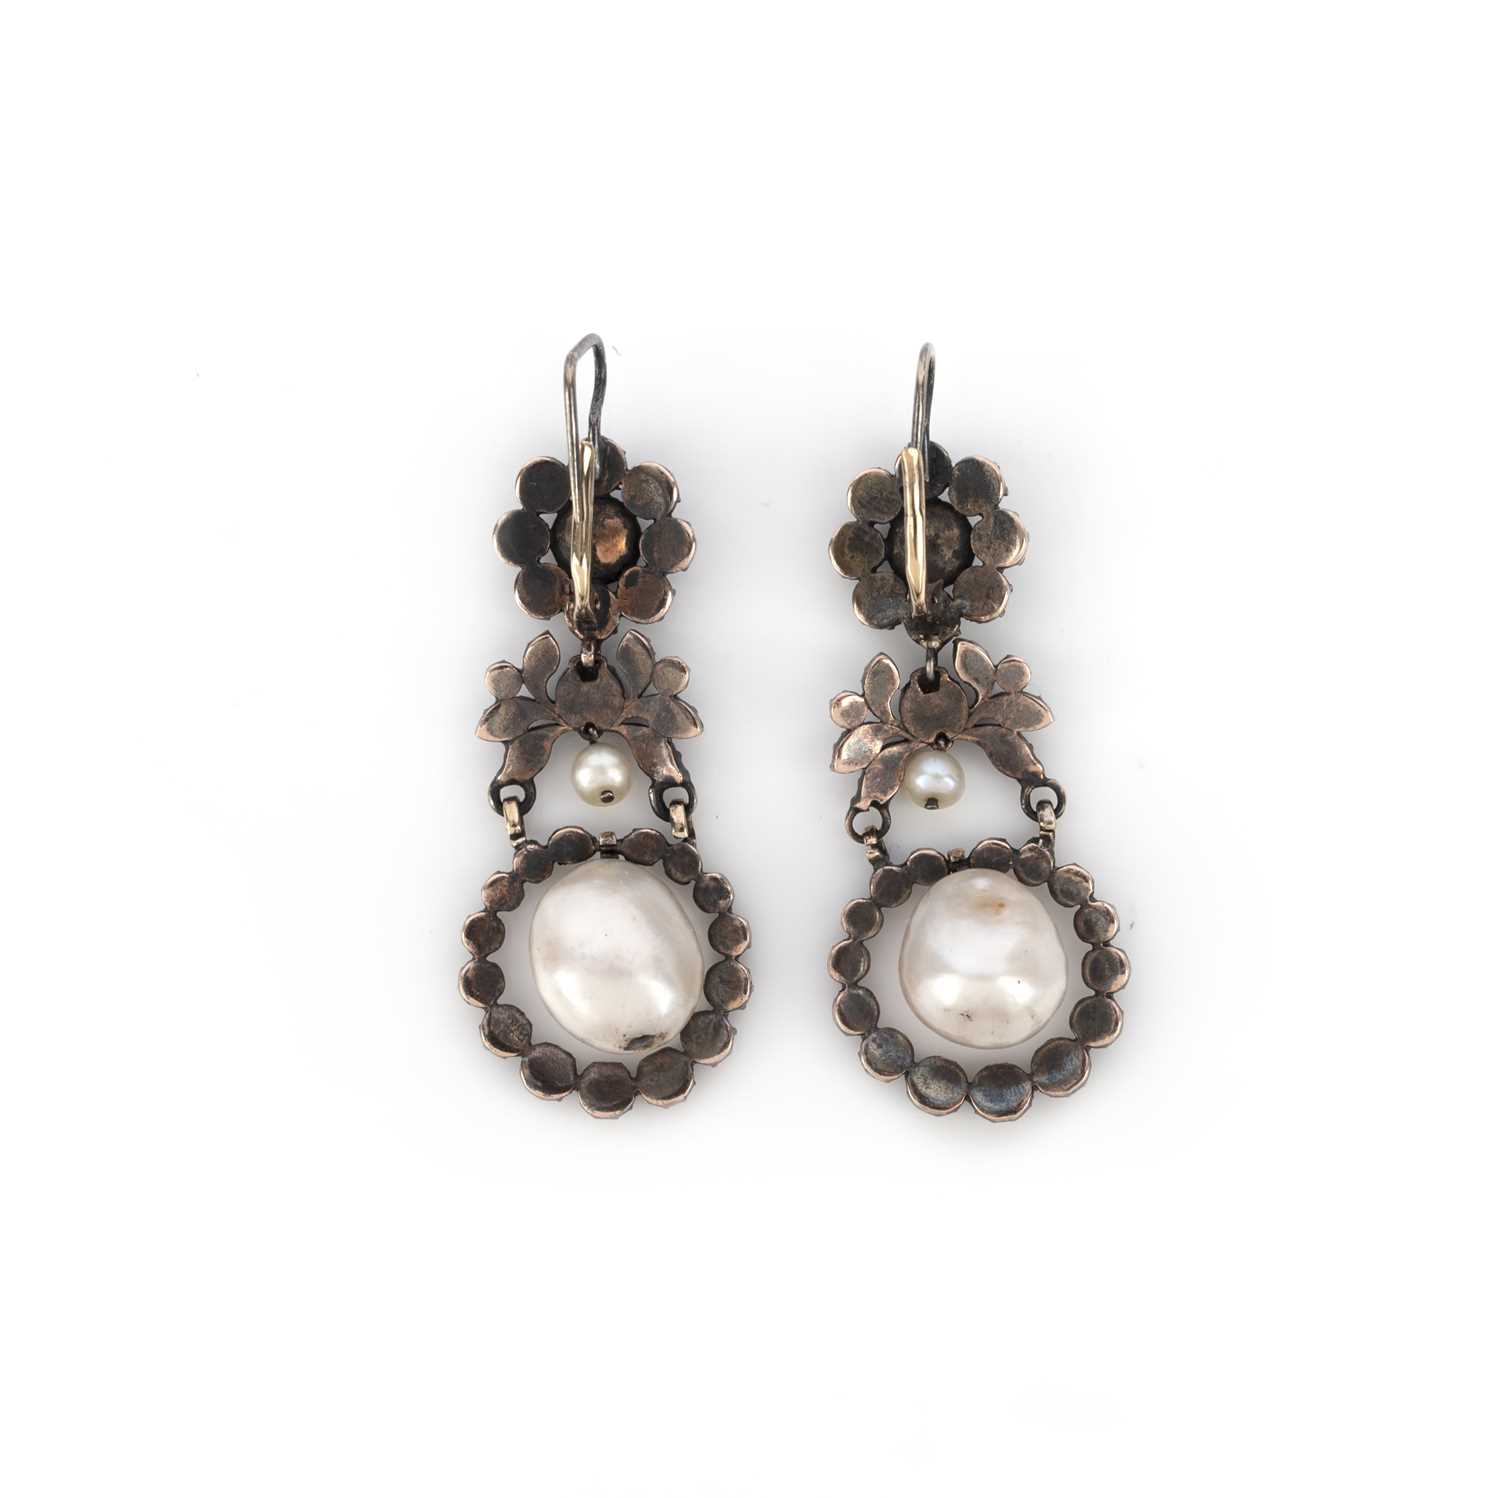 A pair of natural pearl and diamond earrings, each of pendent design, suspending a natural pearl - Image 2 of 3